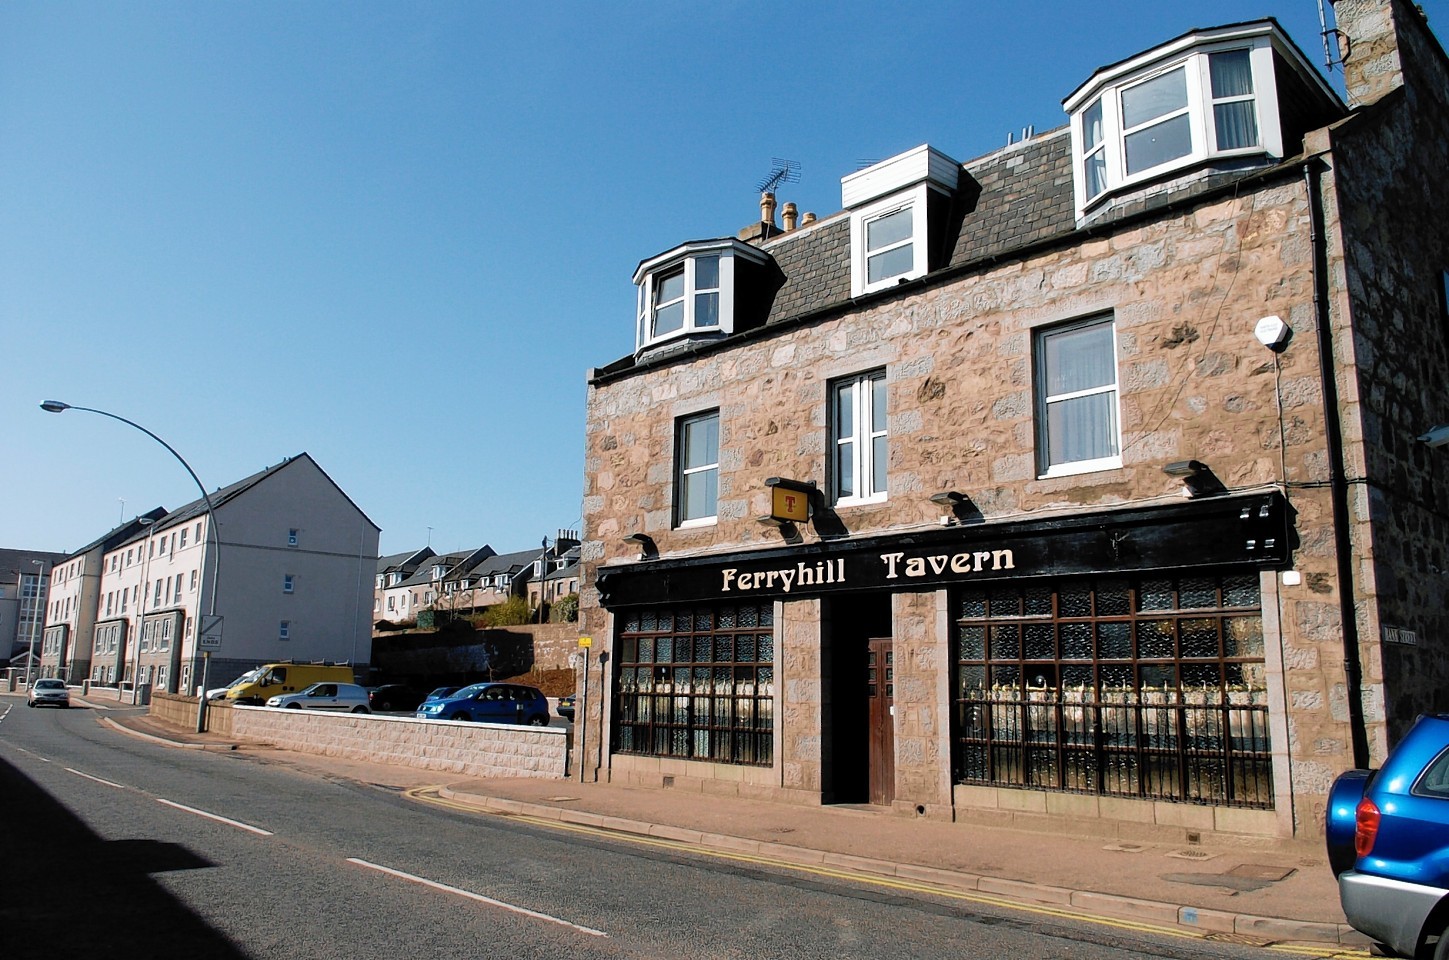 The plans for the Ferryhill Tavern were rejected